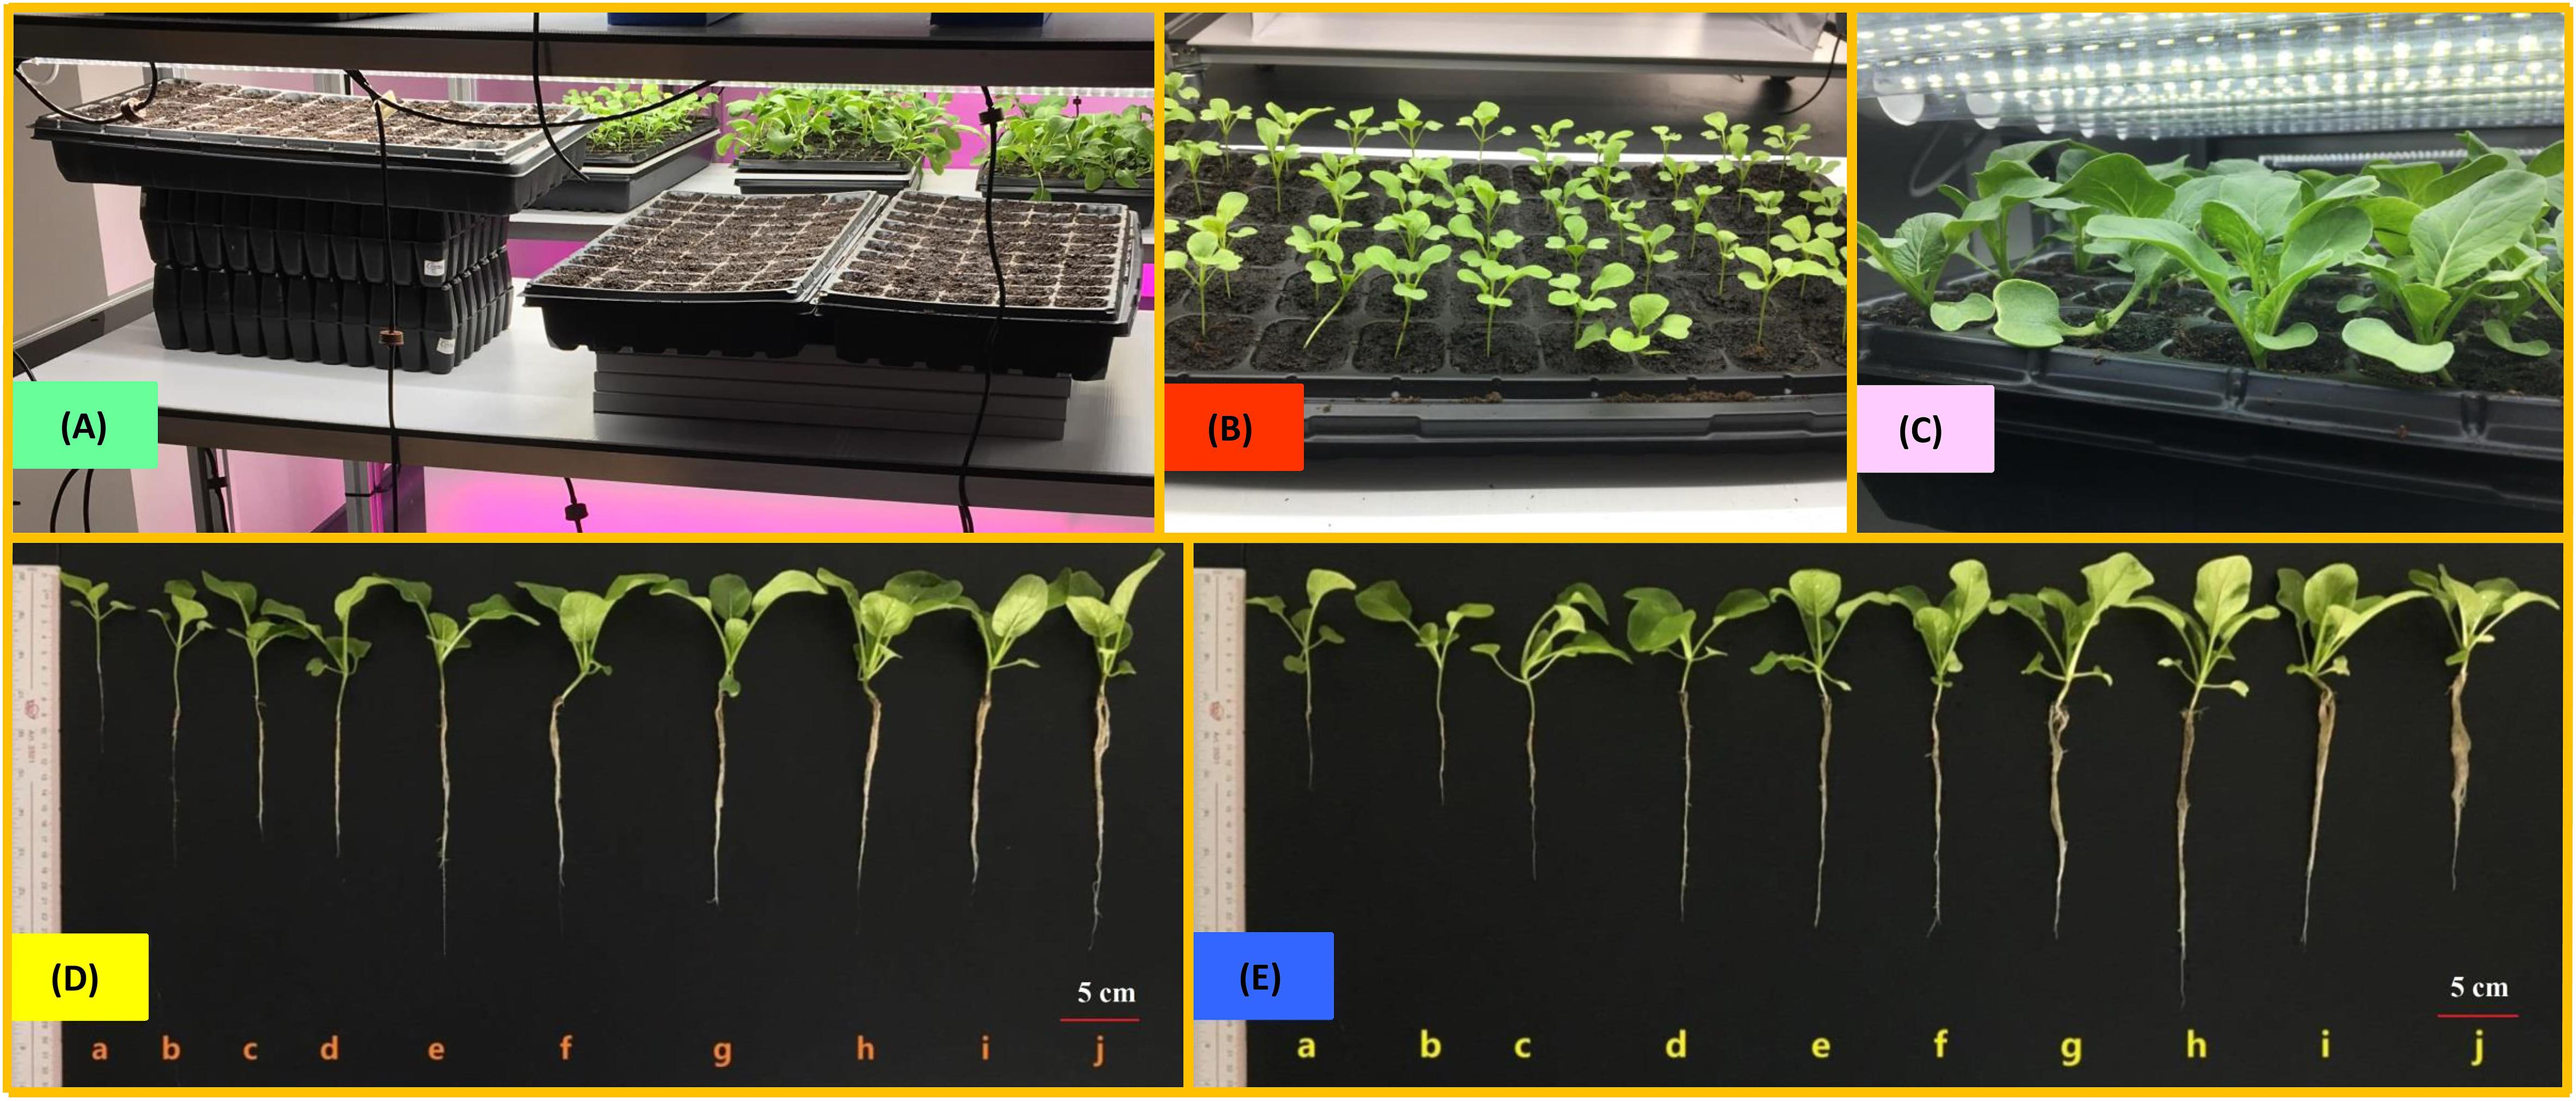 Frontiers Light Time Biomass Response Model For Predicting The Growth Of Choy Sum Brassica Rapa Var Parachinensis In Soil Based Led Constructed Indoor Plant Factory For Efficient Seedling Production Plant Science